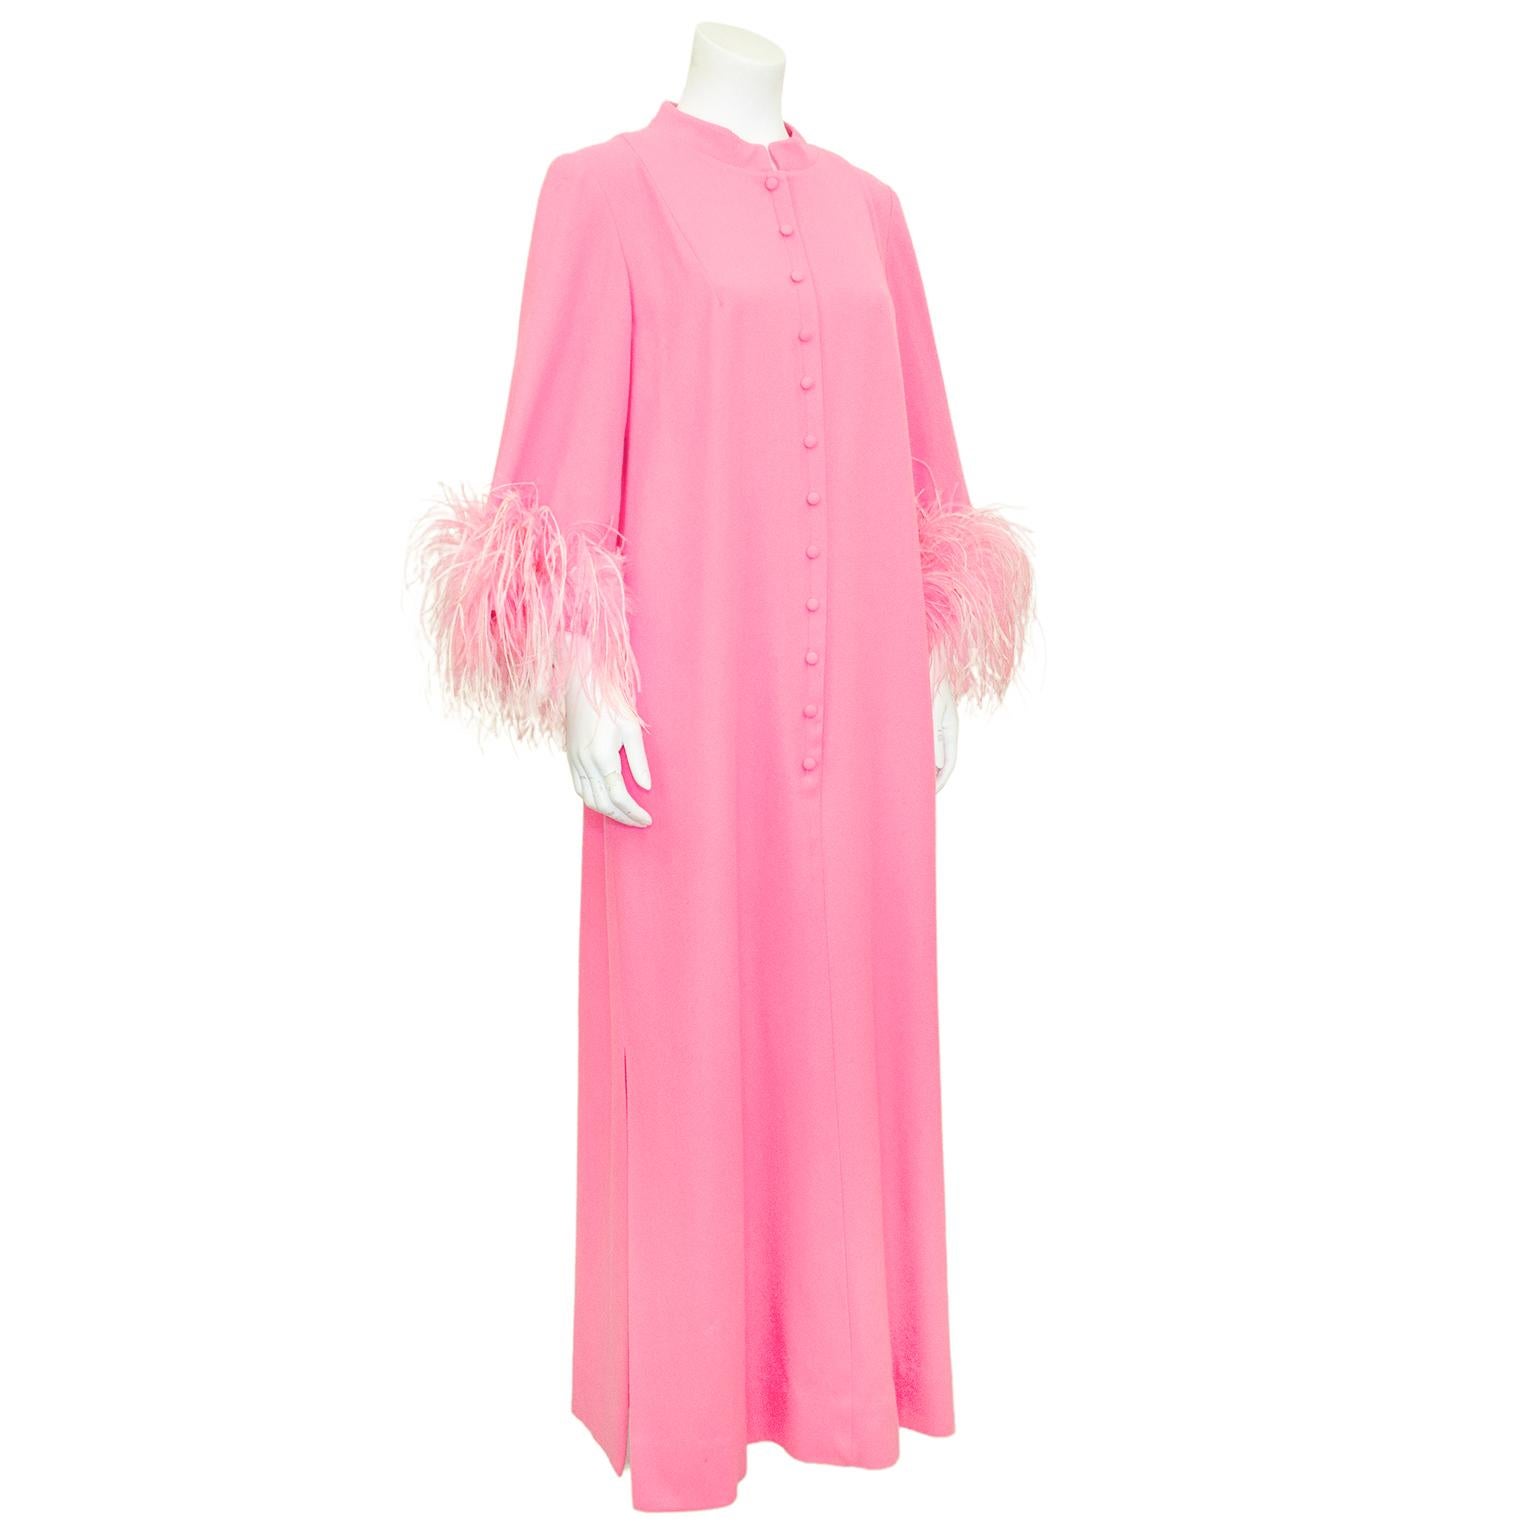 Beautiful, vibrant and fabulous hostess gown from the 1970s. Bright pink wool with pink and white ostrich feathers at the cuffs. Mandarin collar with a front zipper at centre seam that is covered by faux buttons. Floor length with a 2.5